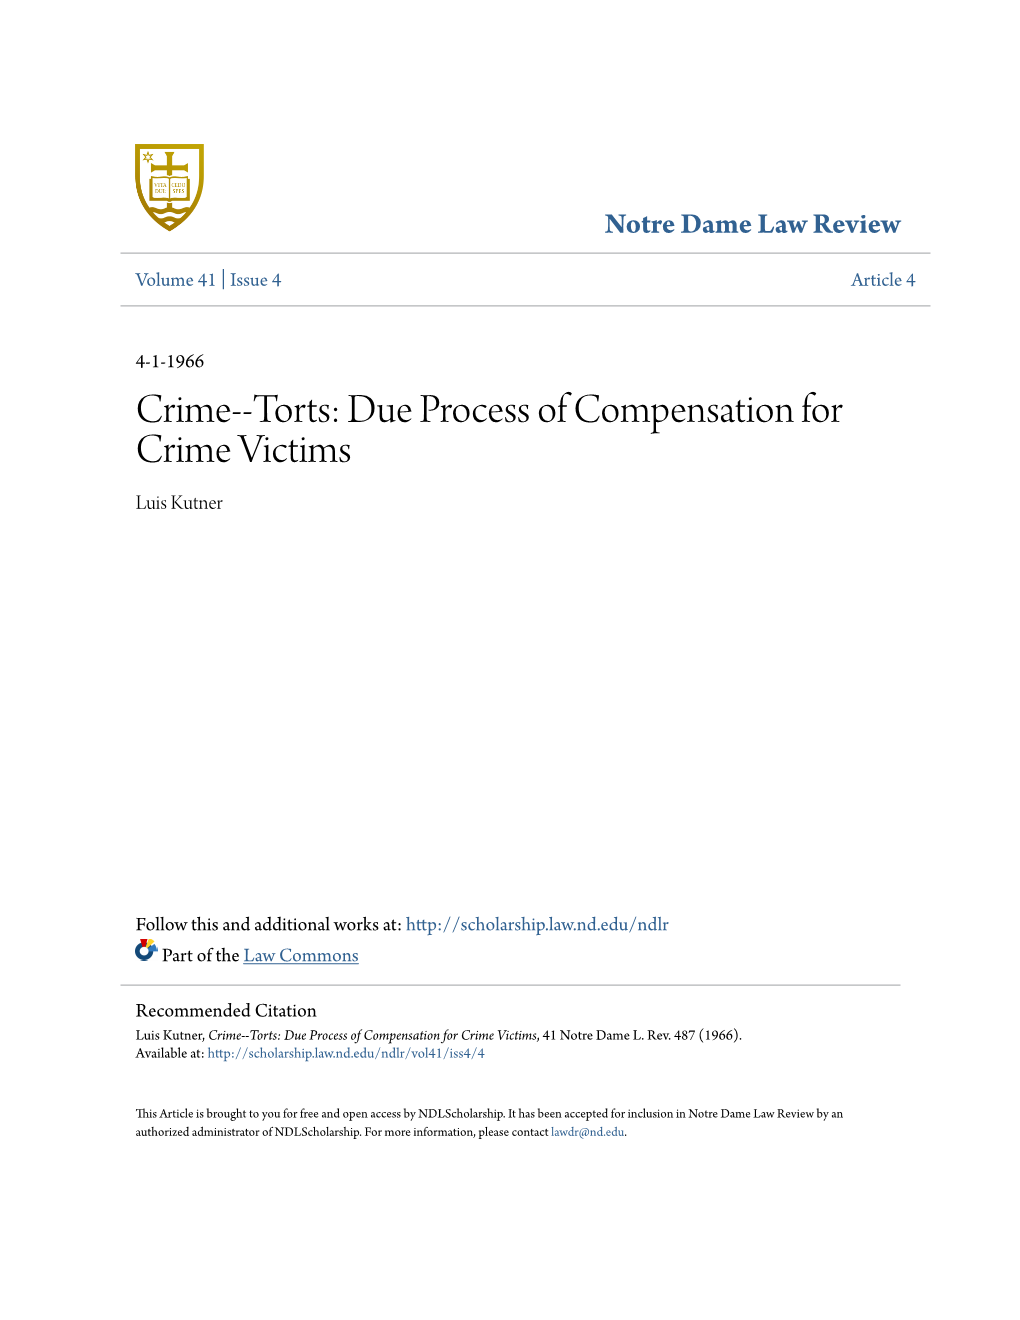 Torts: Due Process of Compensation for Crime Victims Luis Kutner